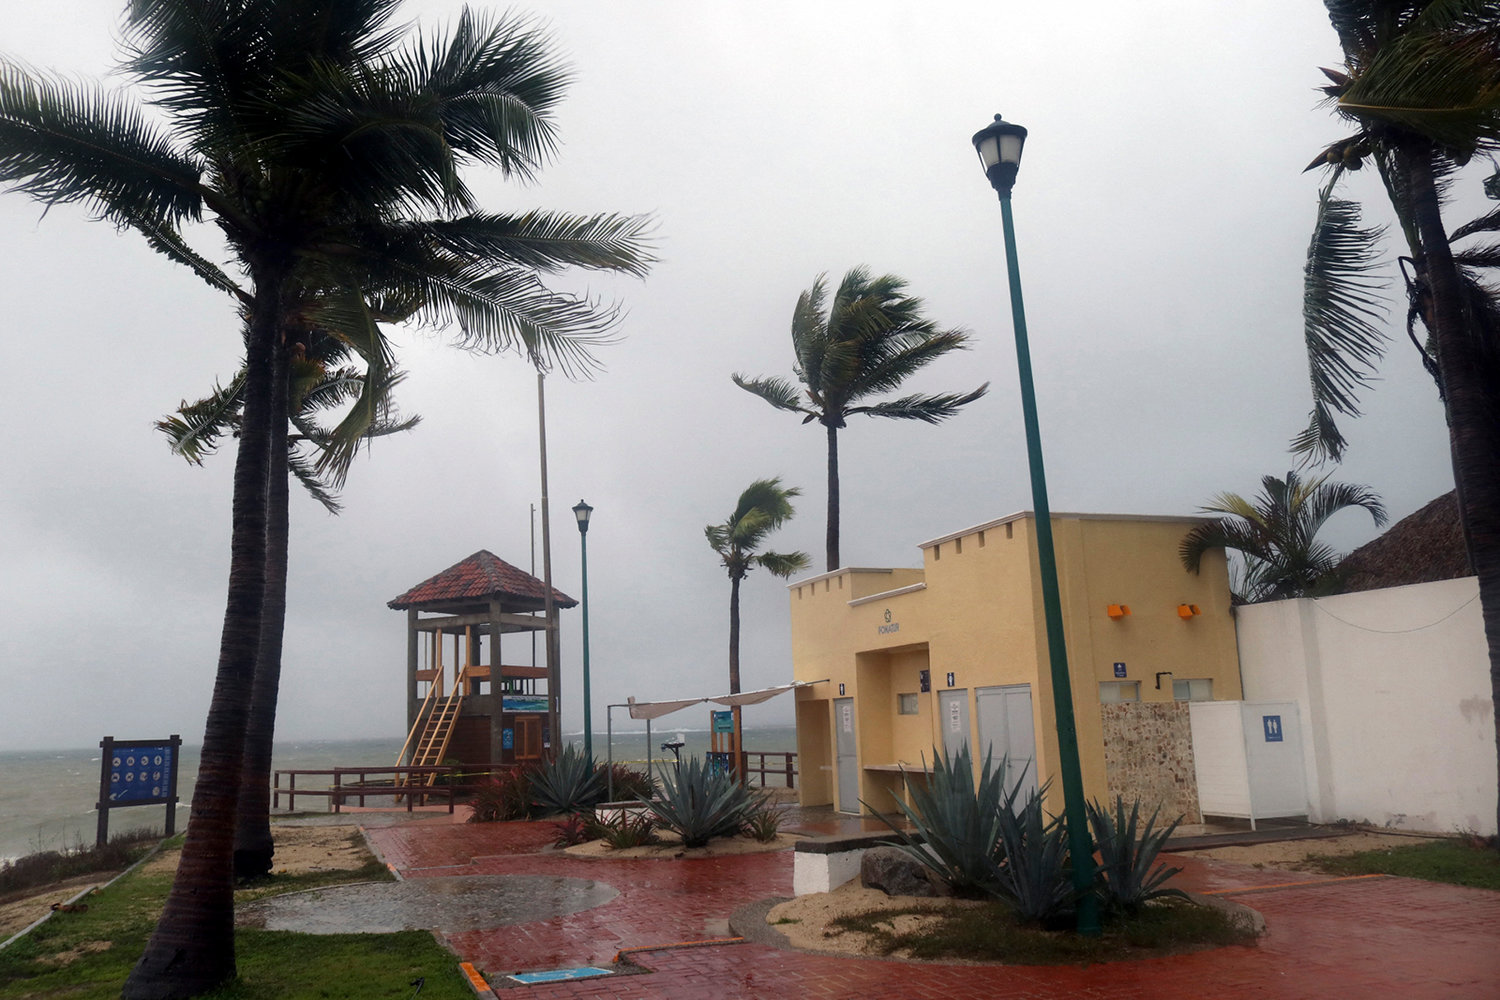 Palm trees blow in the wind before Hurricane Agatha makes landfall in Huatulco, Oaxaca State, Mexico on May 30, 2022. (Gil Obed/AFP via Getty Images/TNS)